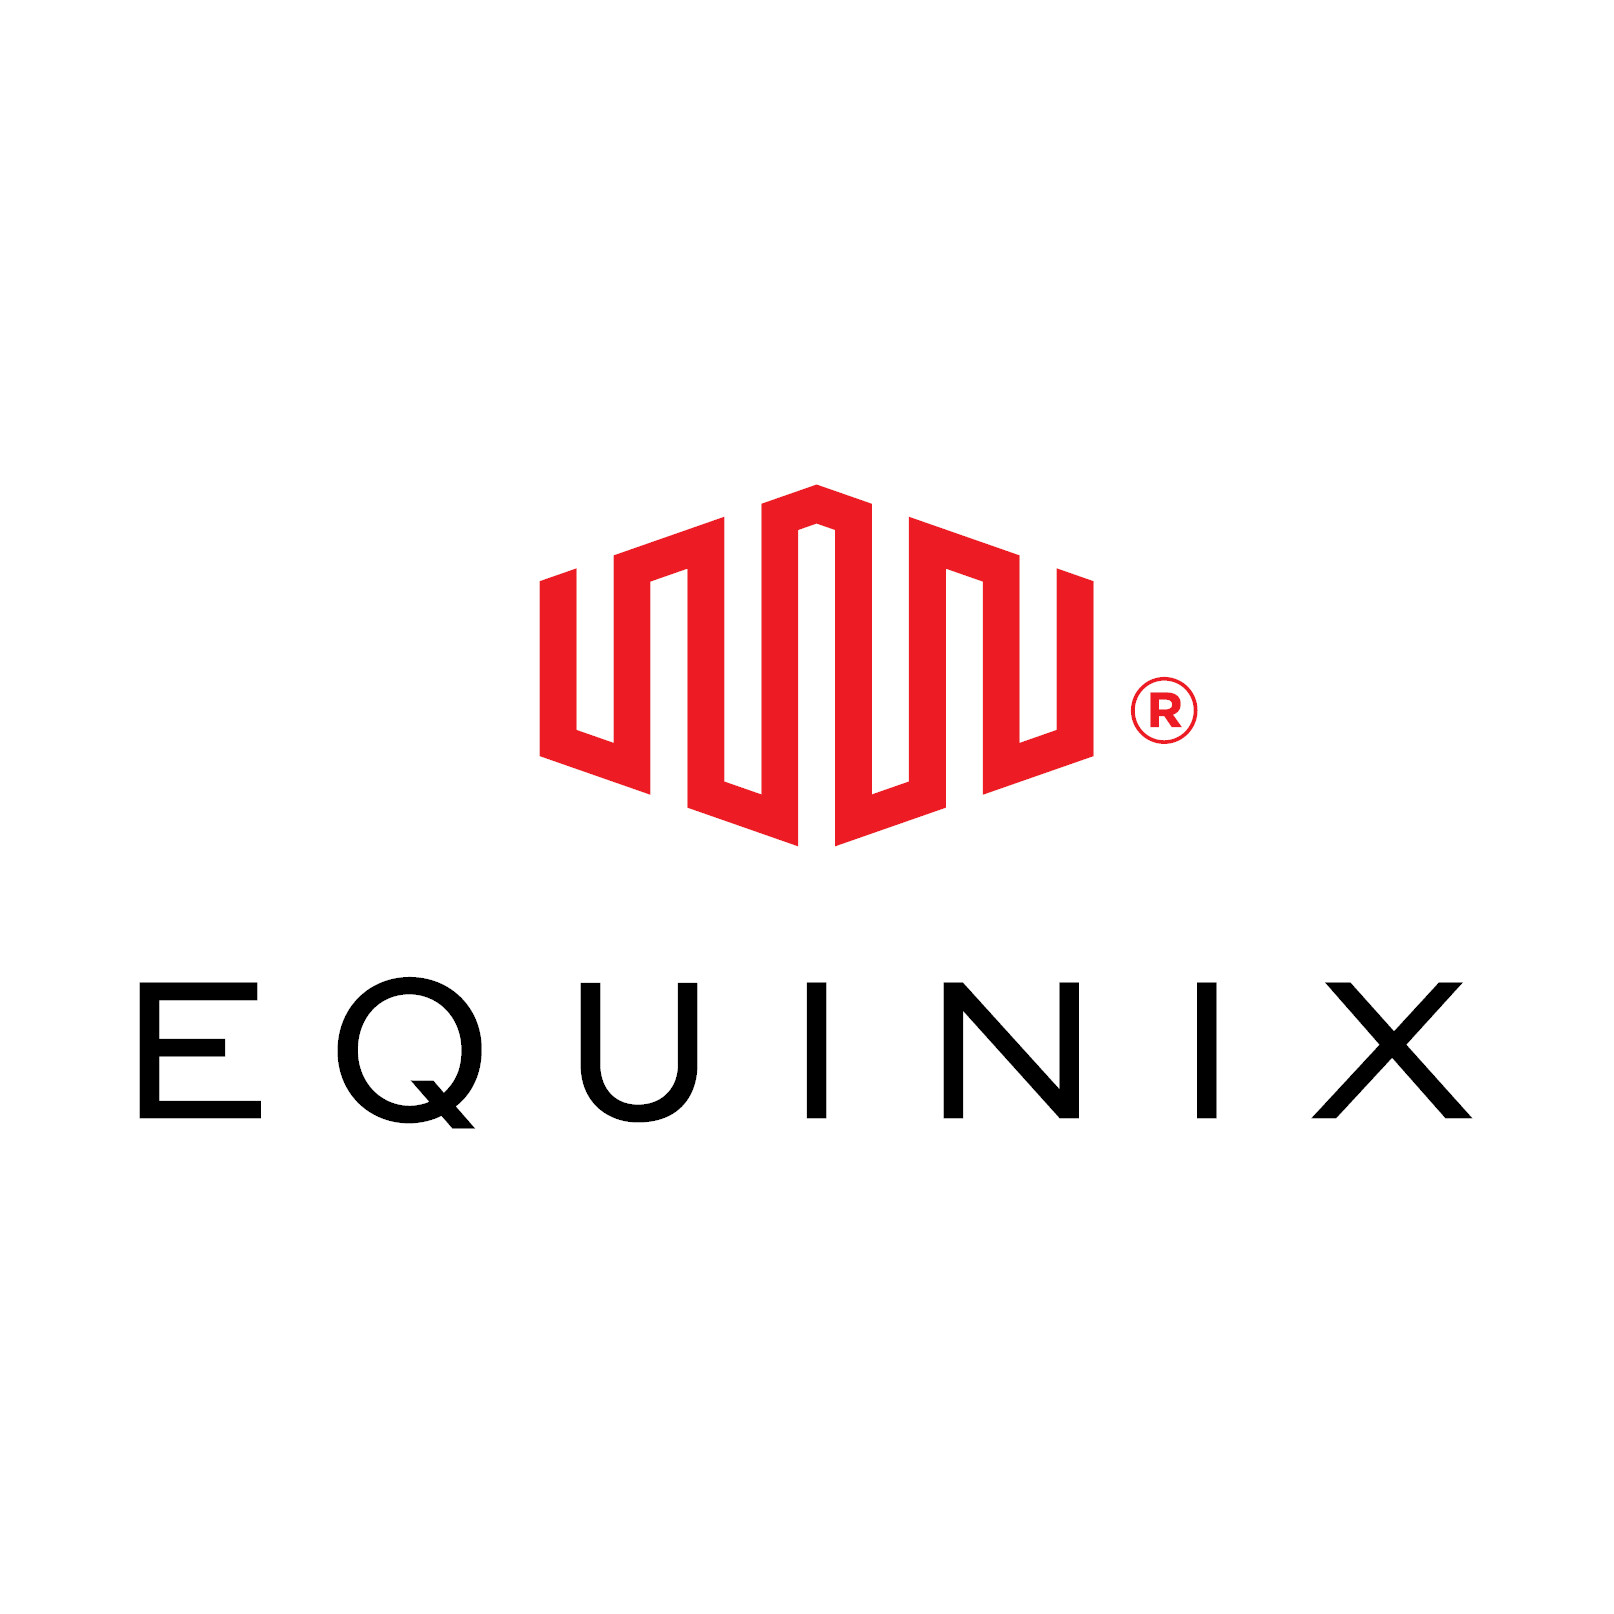 Equinix-Vertical-Outlined_300